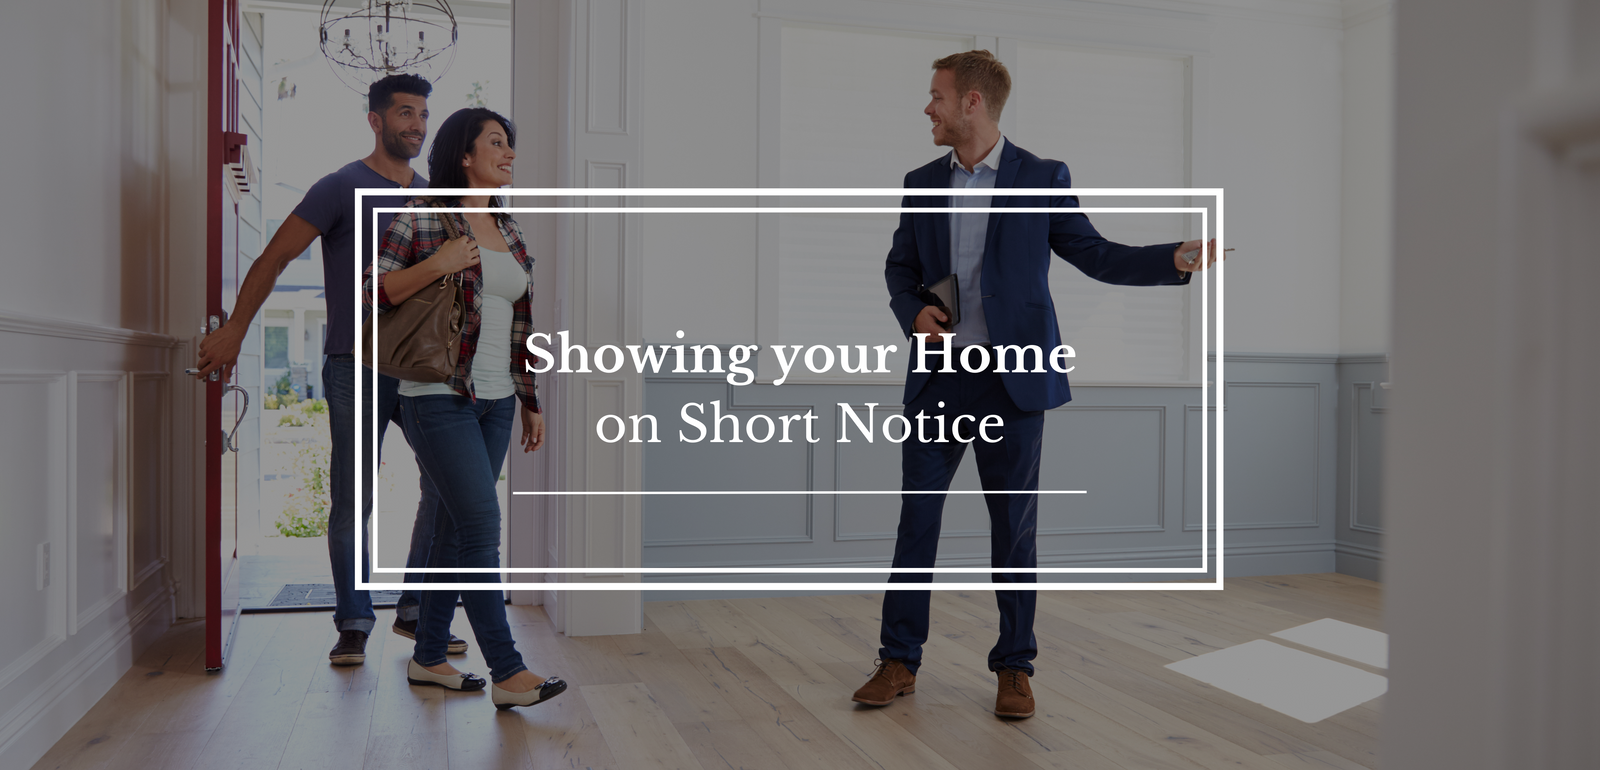 Showing your Home on Short Notice